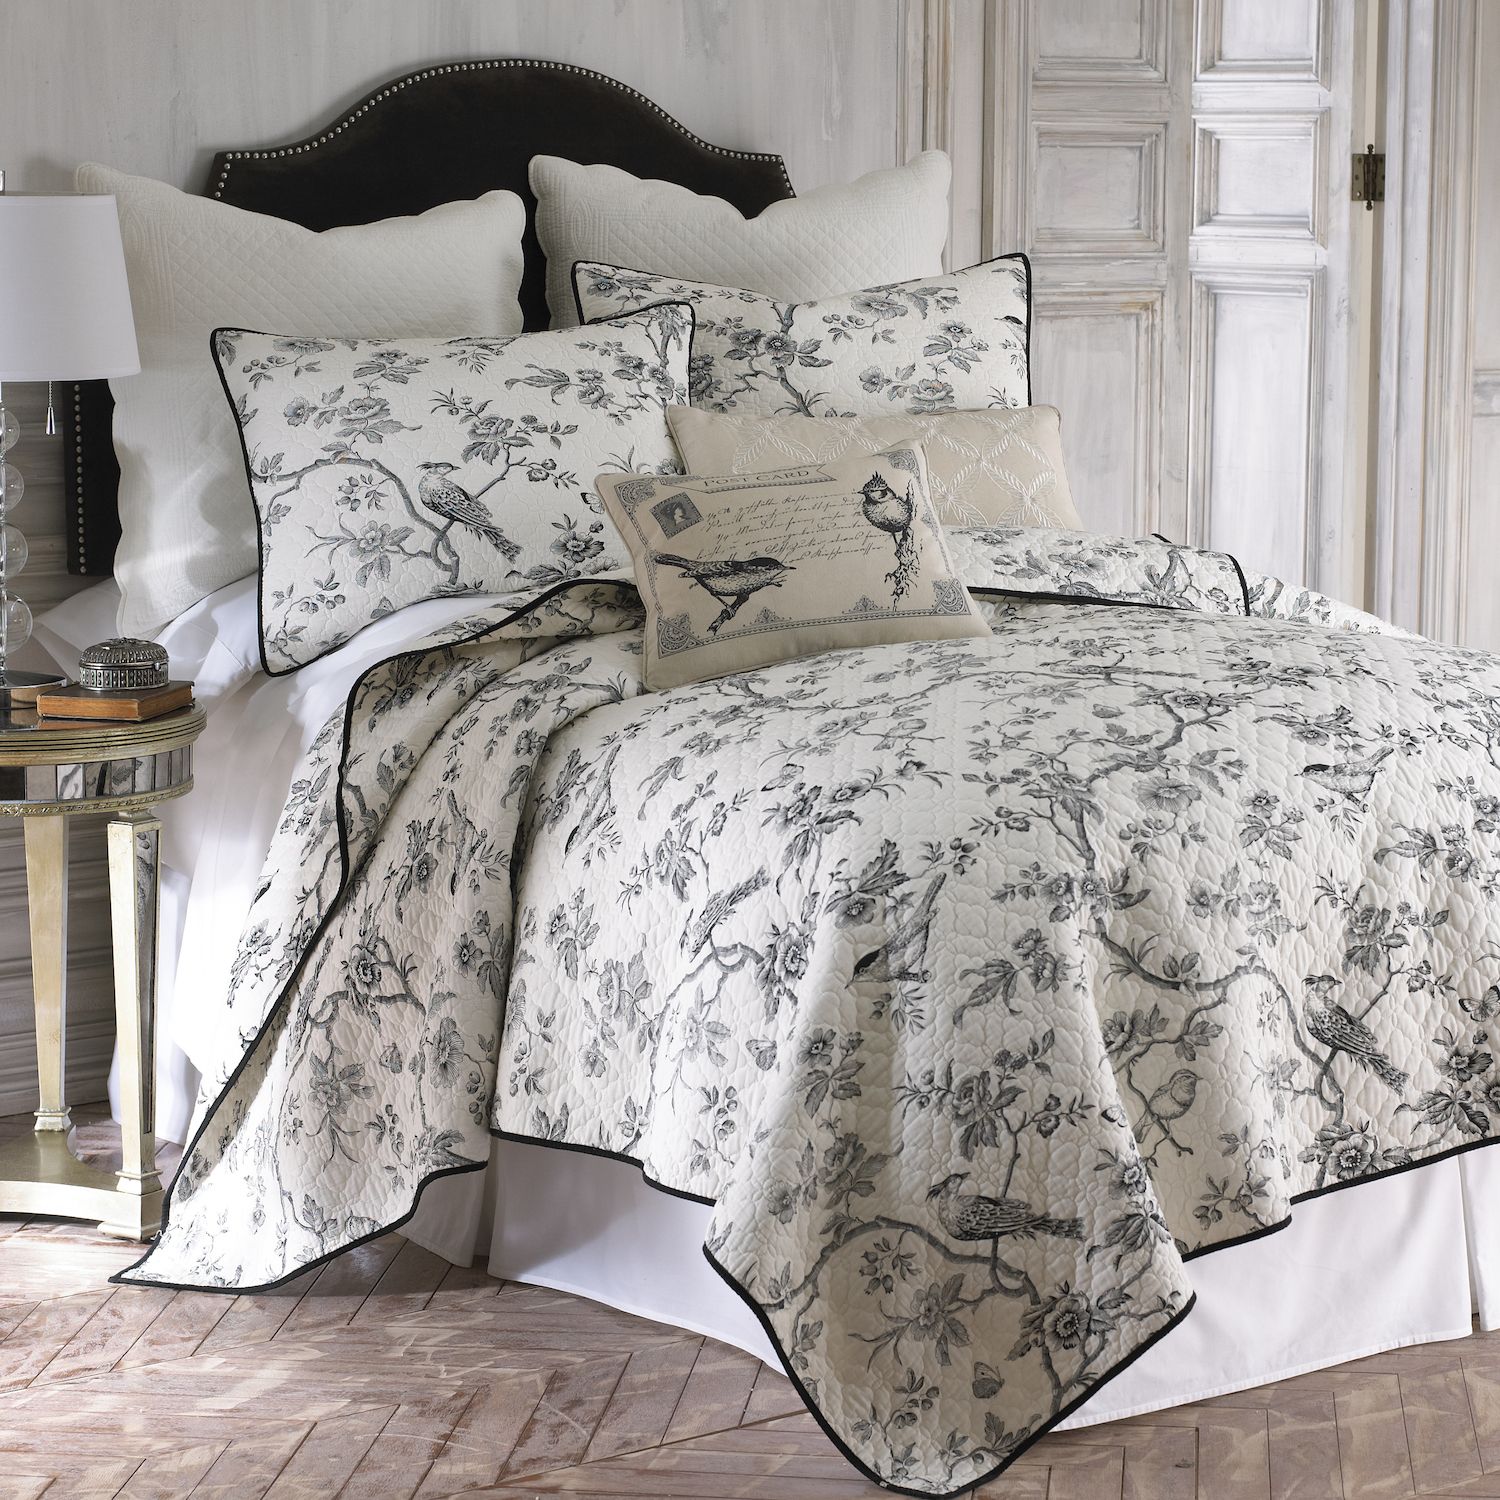 Image for Levtex Home Black Toile Quilt Set at Kohl's.